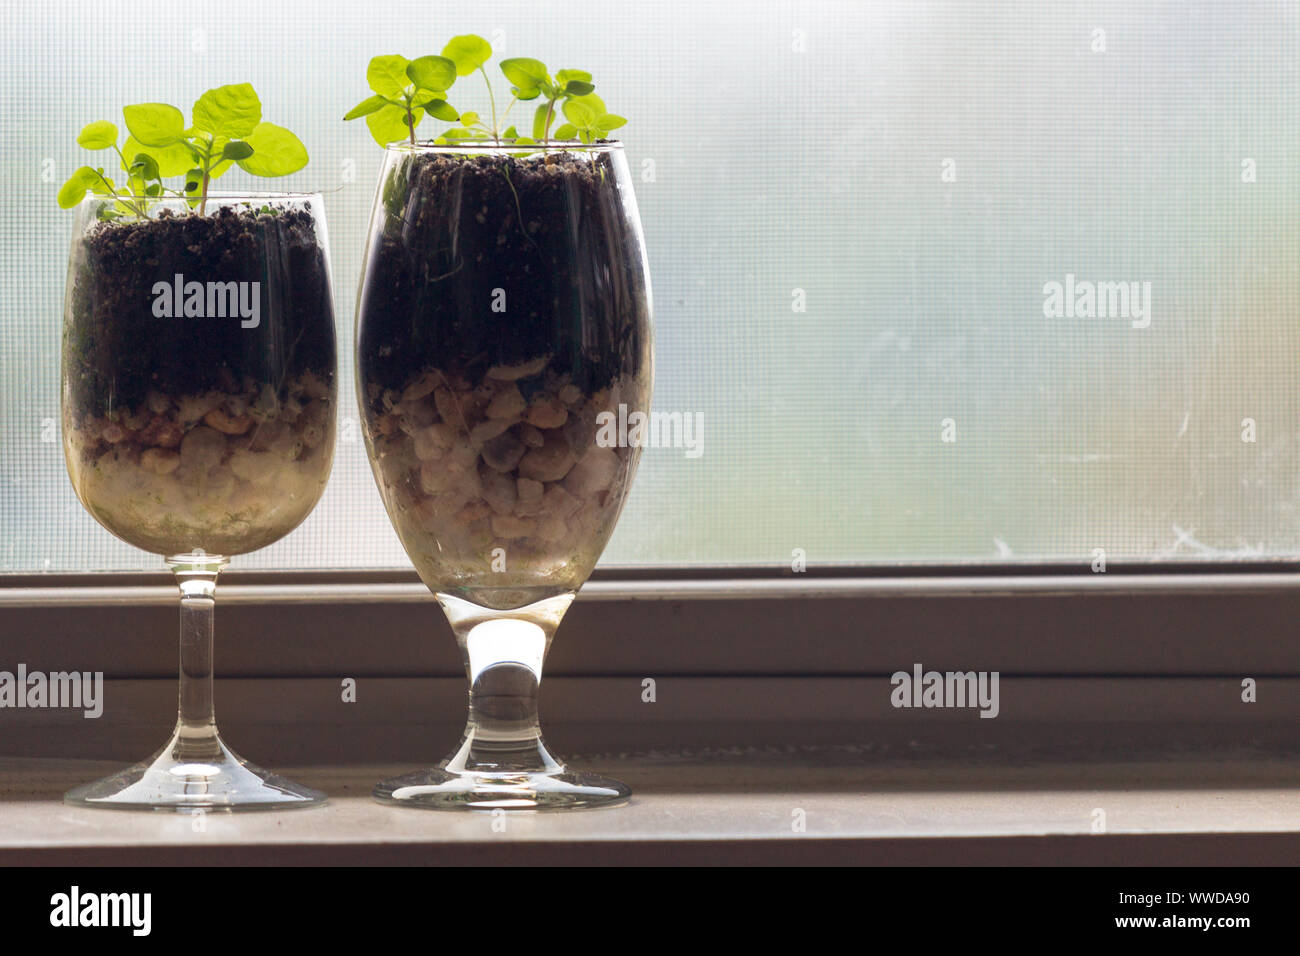 Microgreens grow in two wine glasses on a window sill. Stock Photo